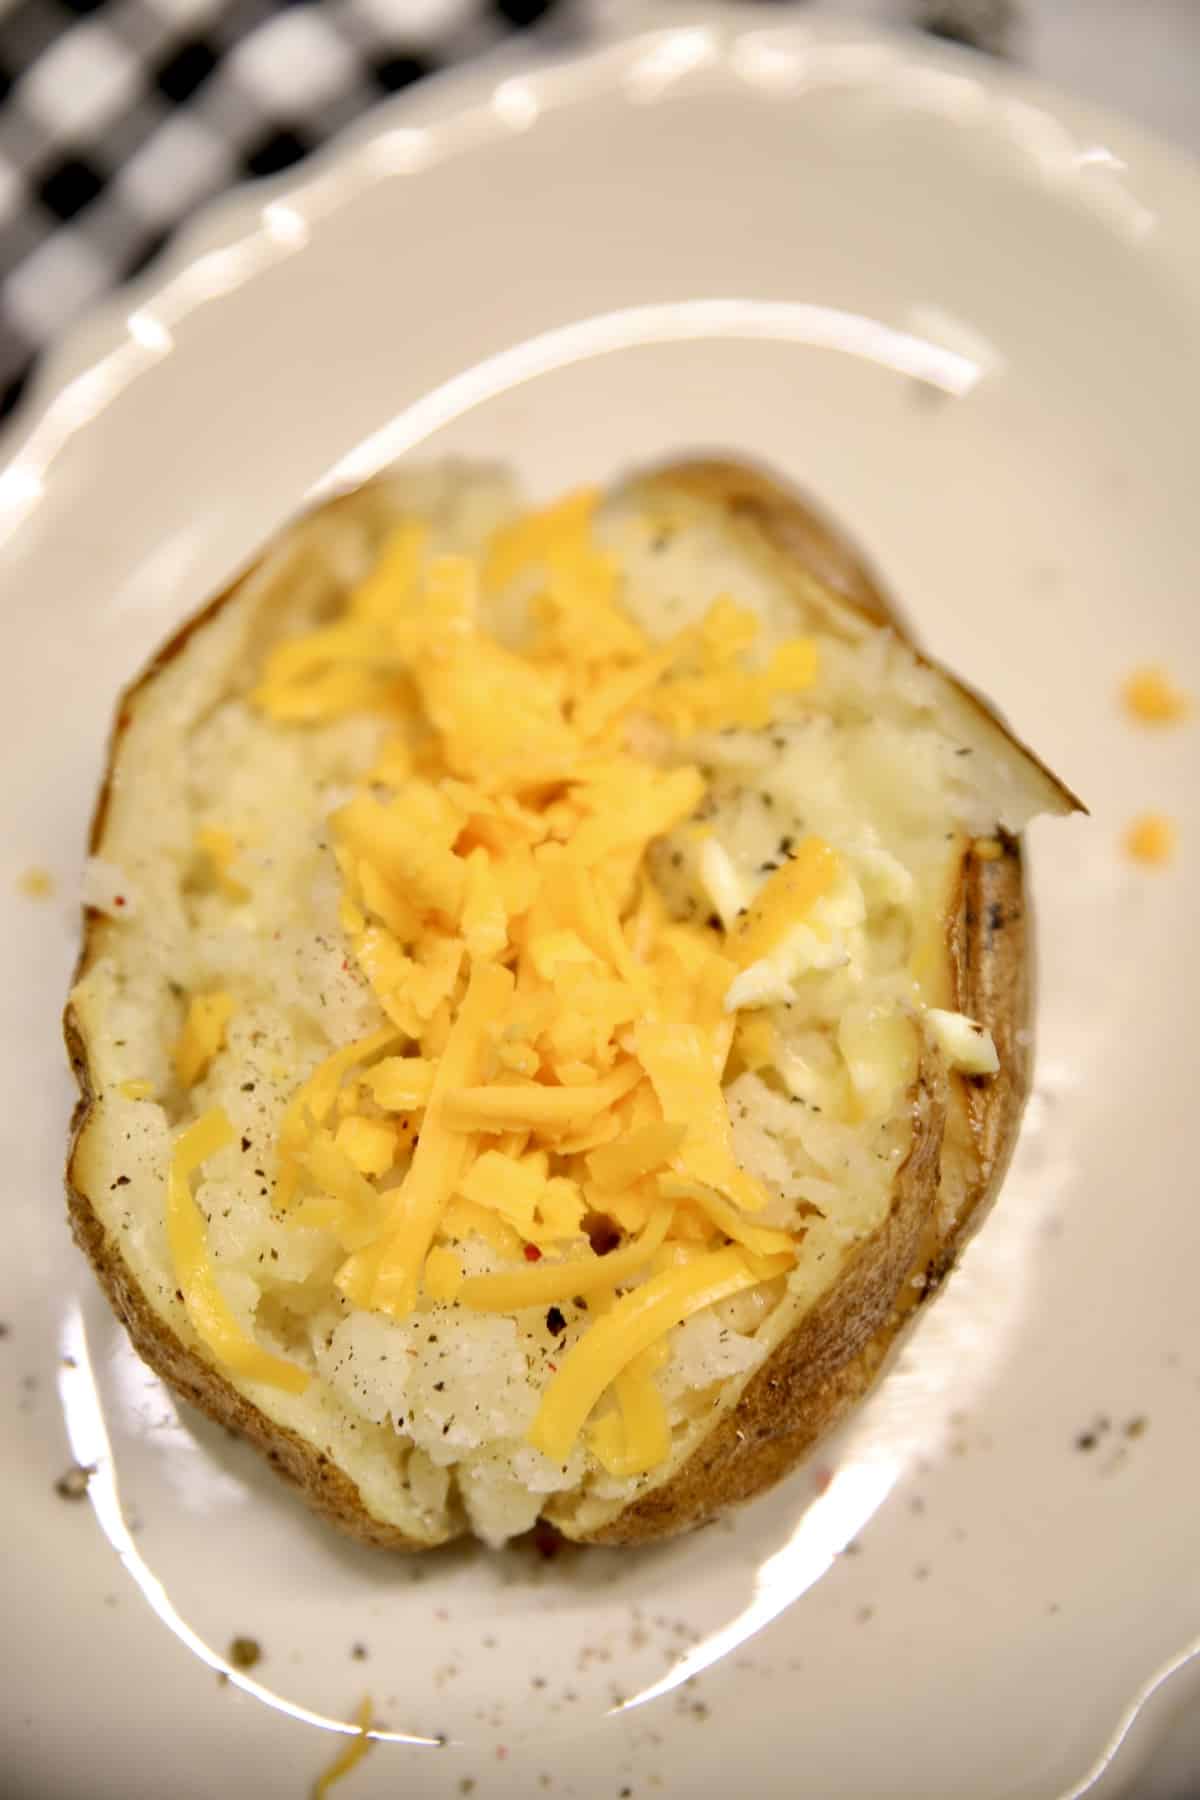 Baked potato with butter and shredded cheese.